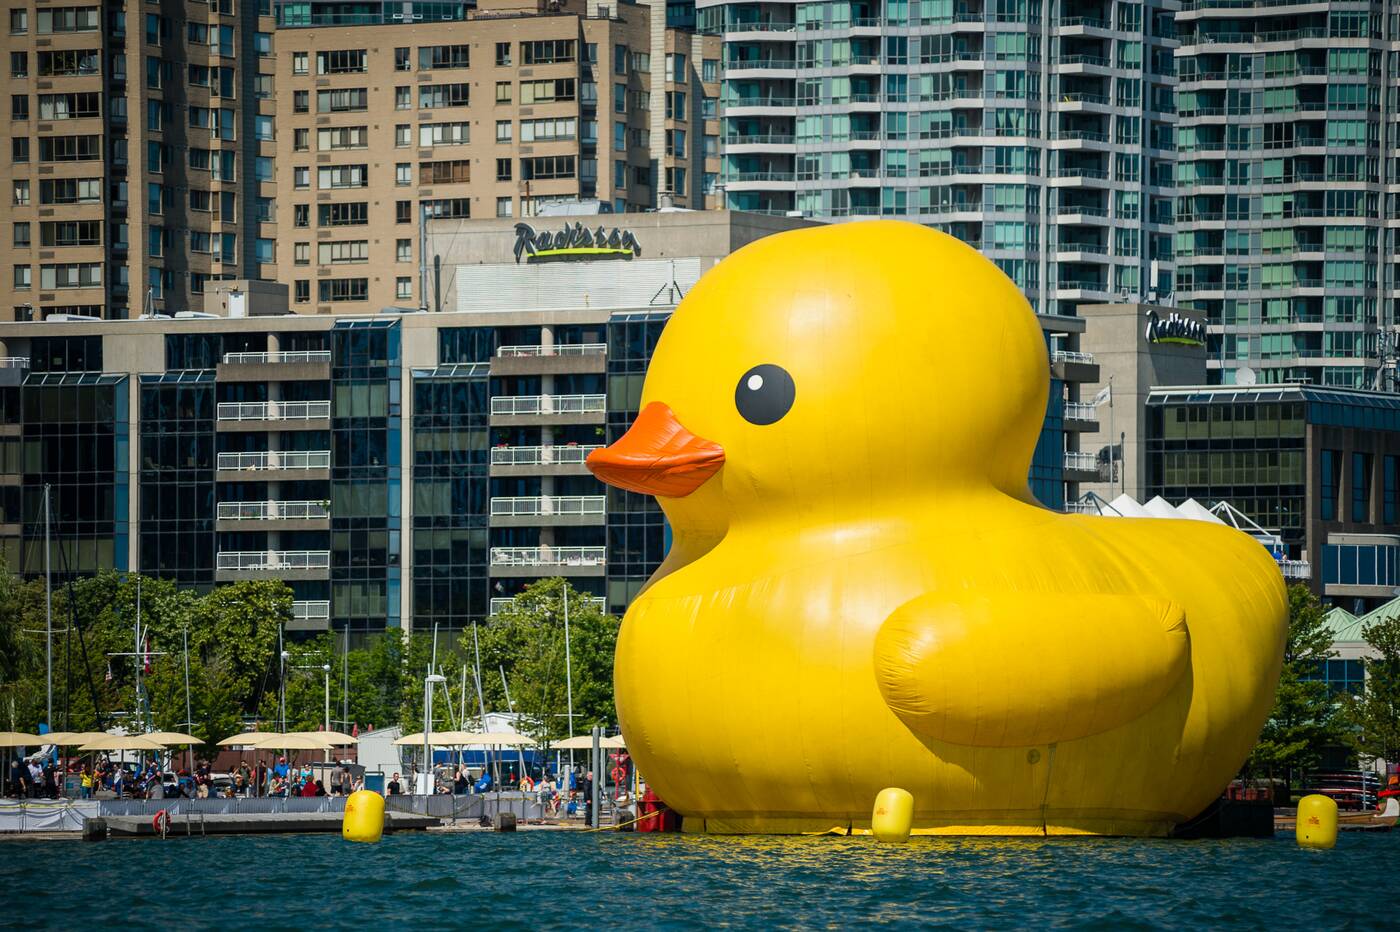 Events In Toronto The Worlds Largest Rubber Duck Is Coming Back To